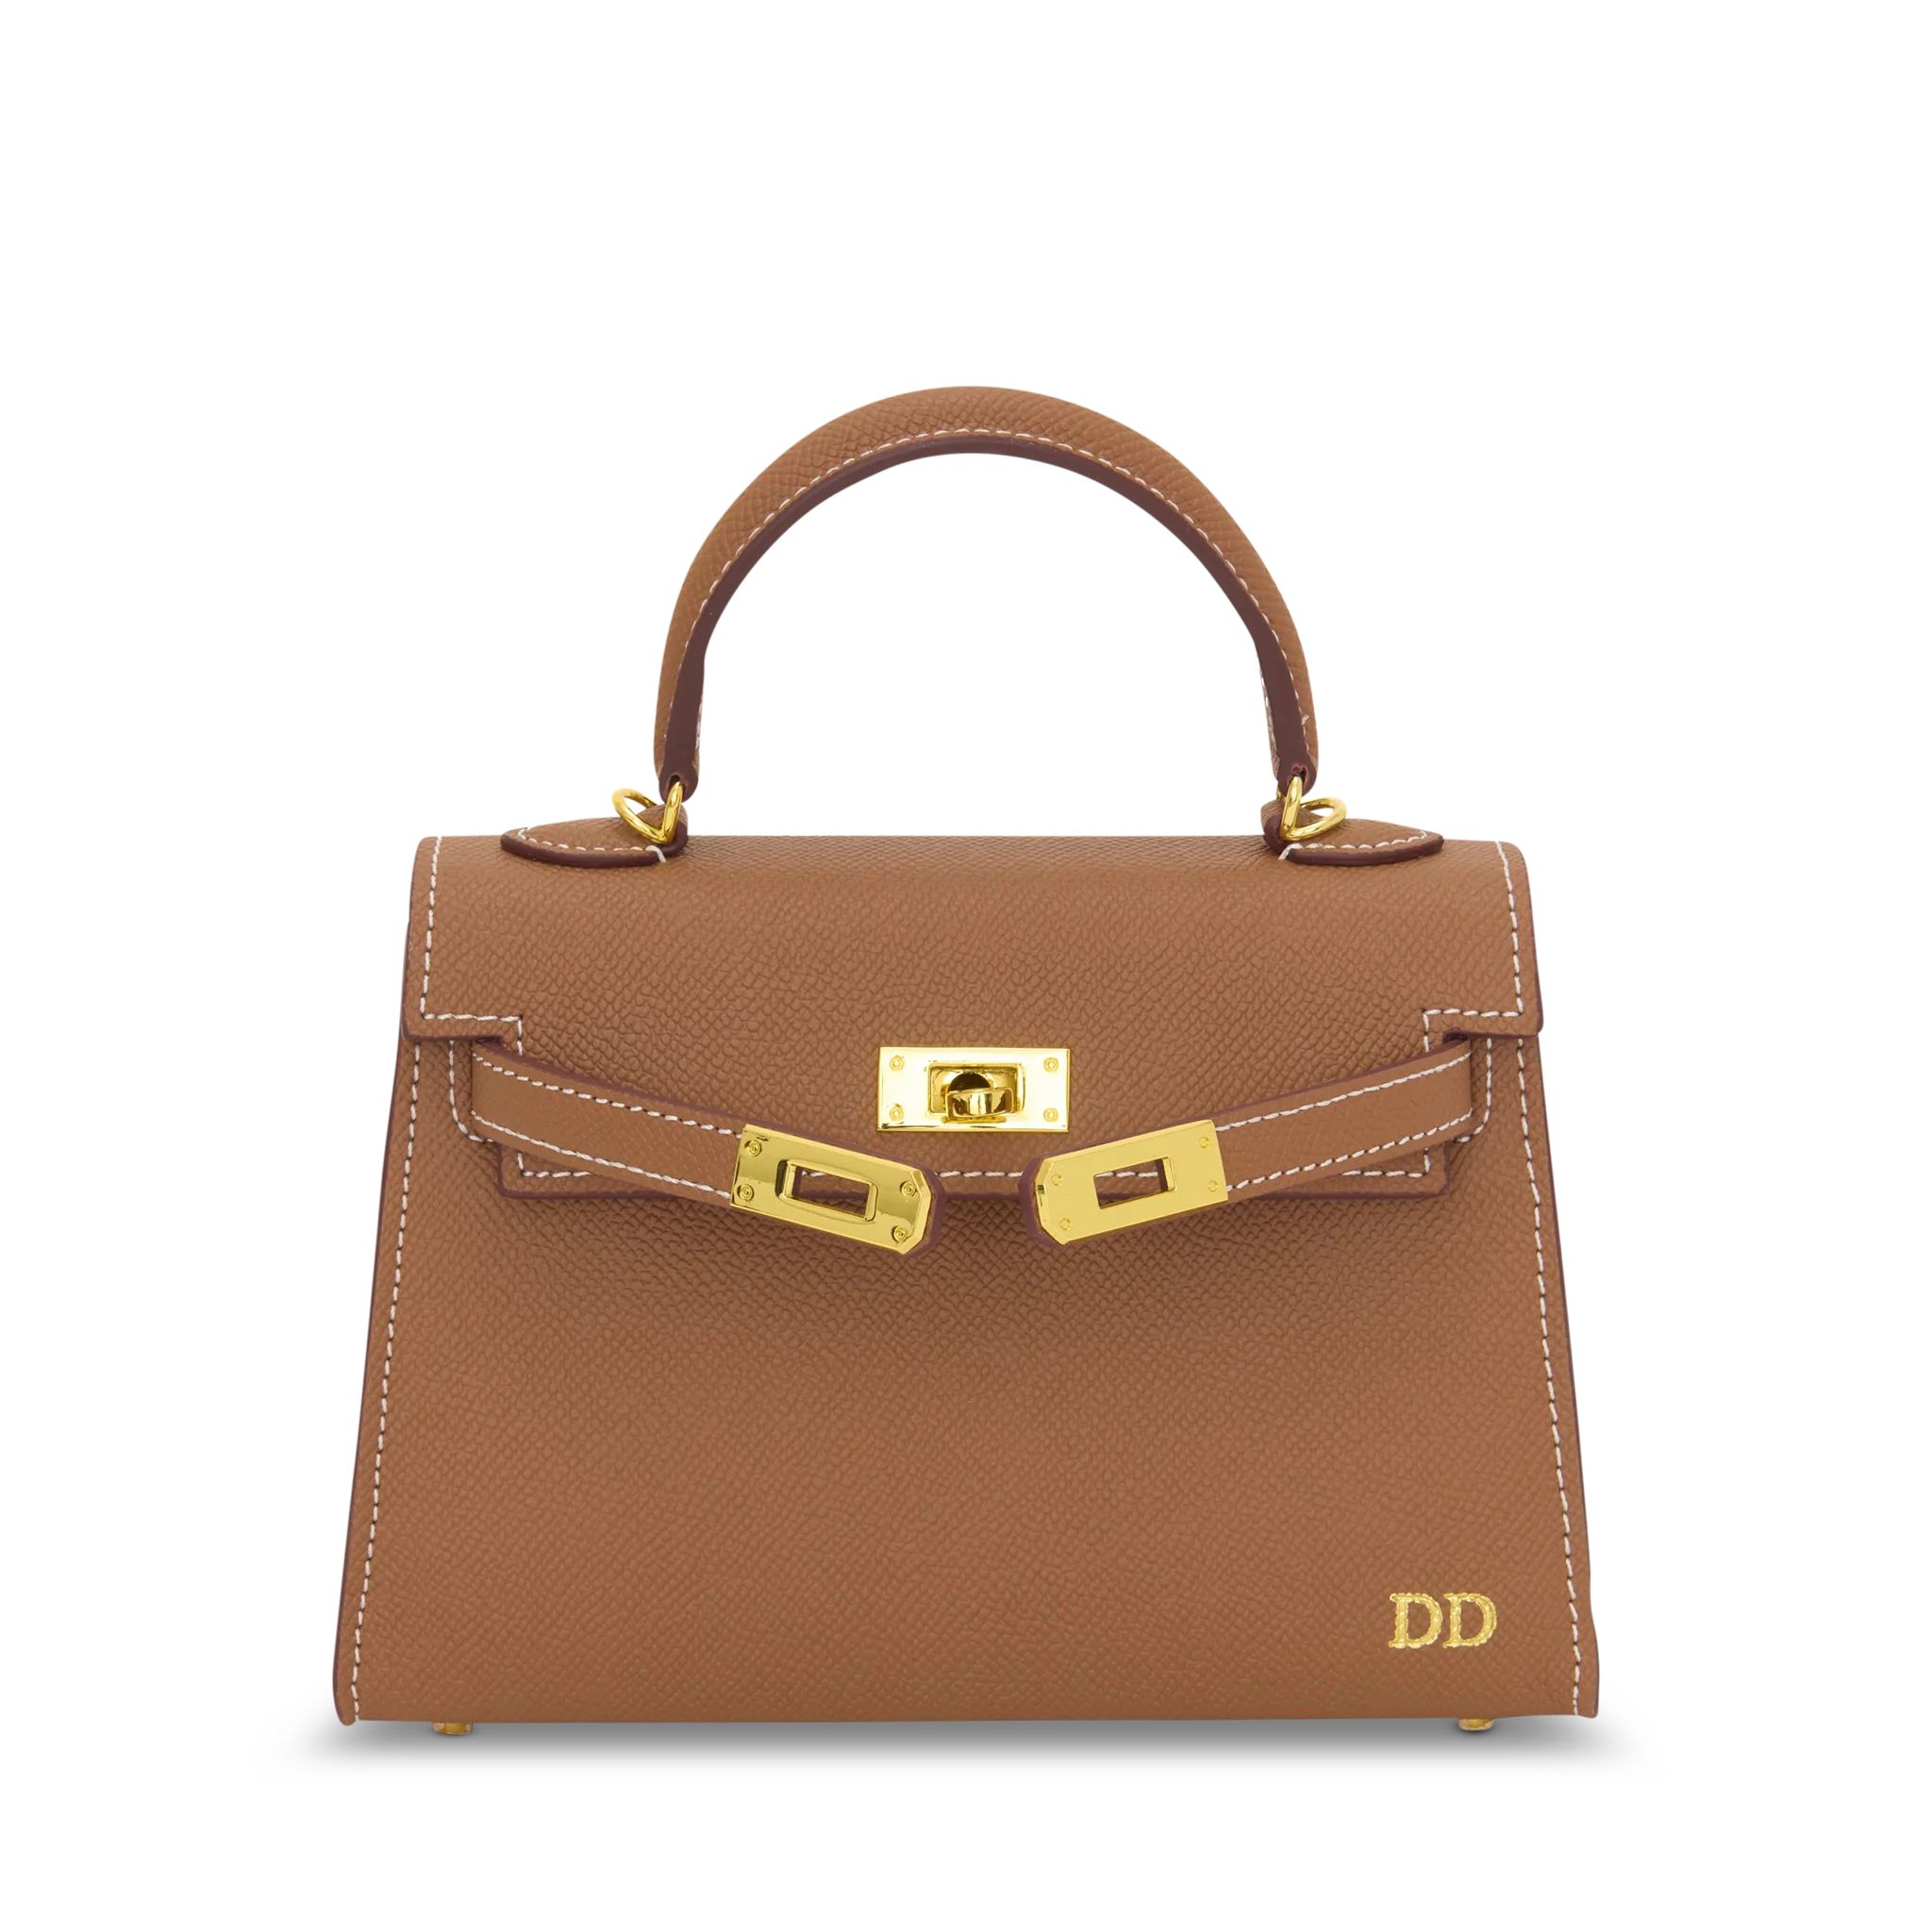 Lily & Bean Hettie Mini Bag - Tan with Initials and Leather Strap | Lily and Bean